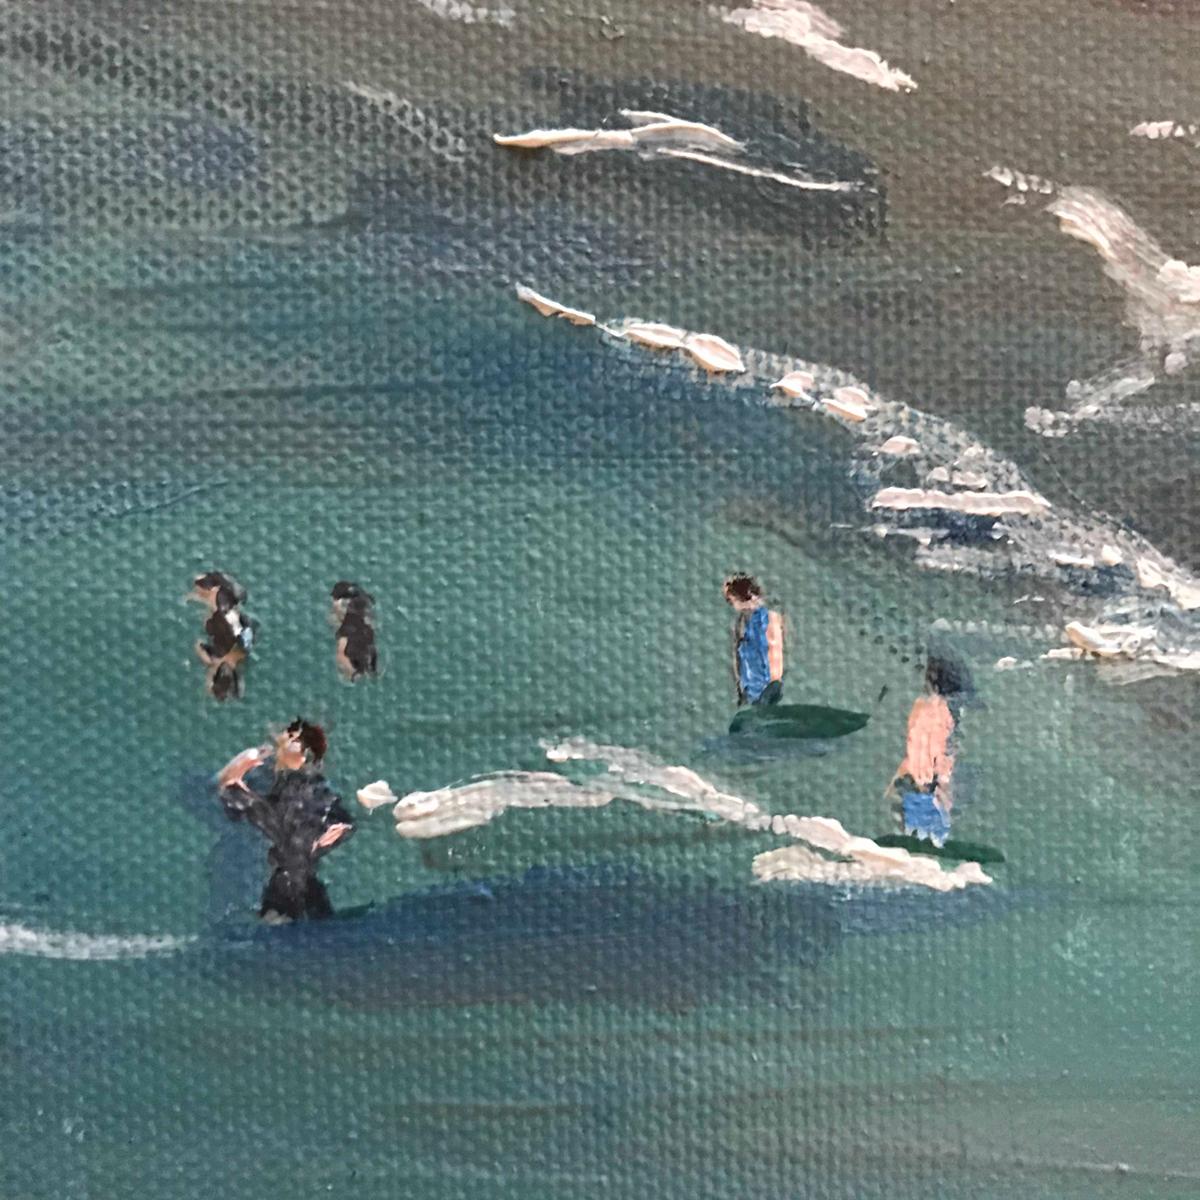 Polzeath Surfers is an Original Painting by Eleanor Woolley Painted in the Artist's Gloucestershire Studio, Polzeath Surfers is Inspired by a trip to Cornwall last Summer. Photographs were taken and sketches of the surfers were made to obtain the